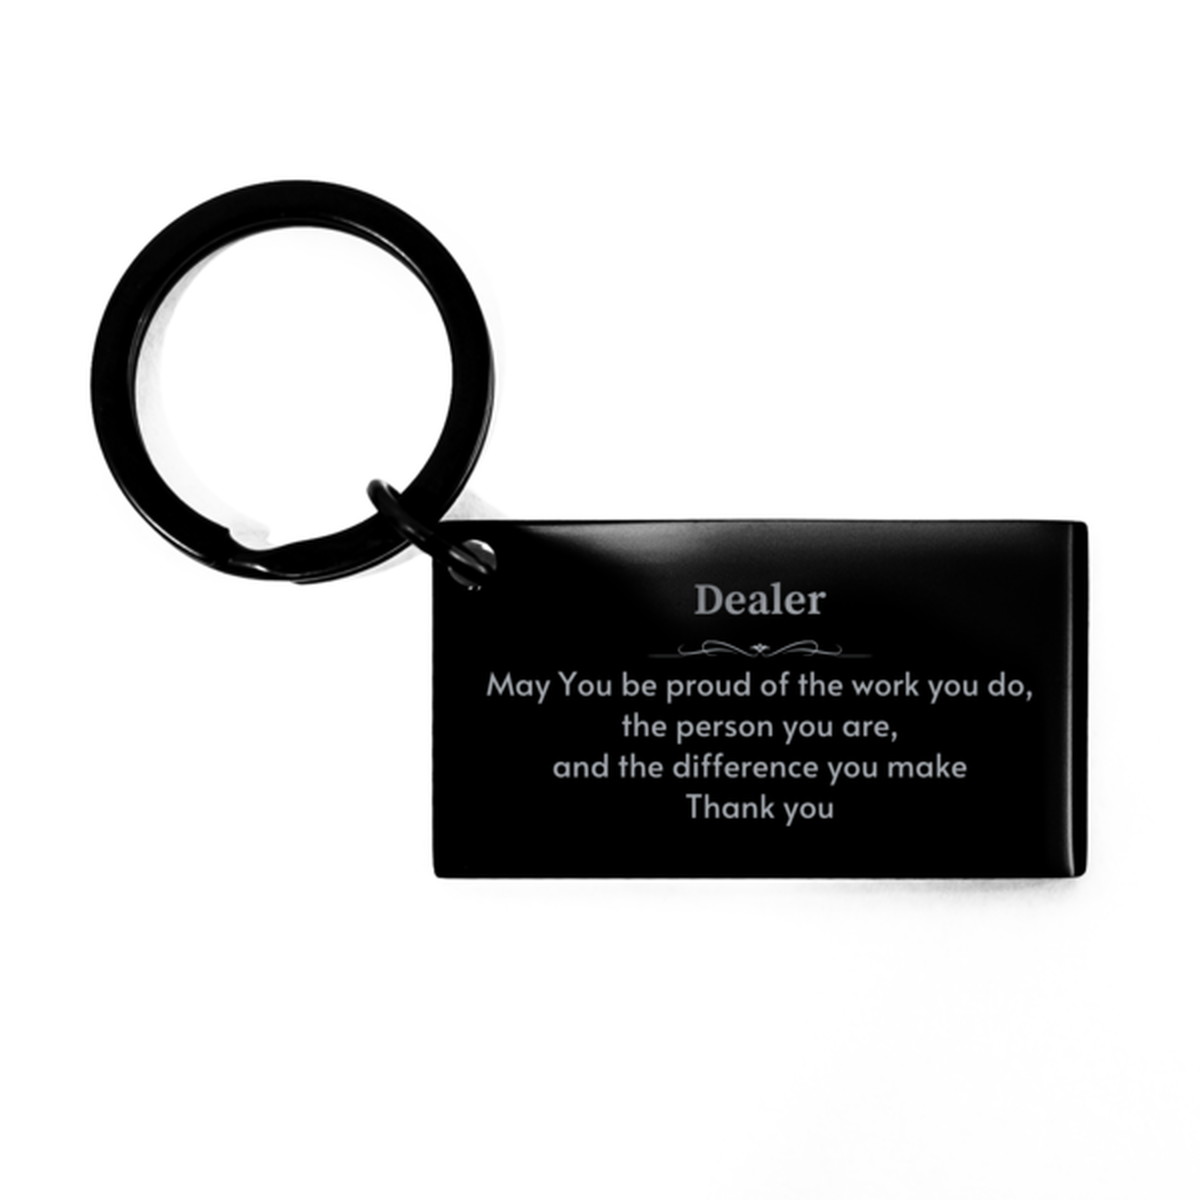 Heartwarming Keychain Retirement Coworkers Gifts for Dealer, Game Warden May You be proud of the work you do, the person you are Gifts for Boss Men Women Friends